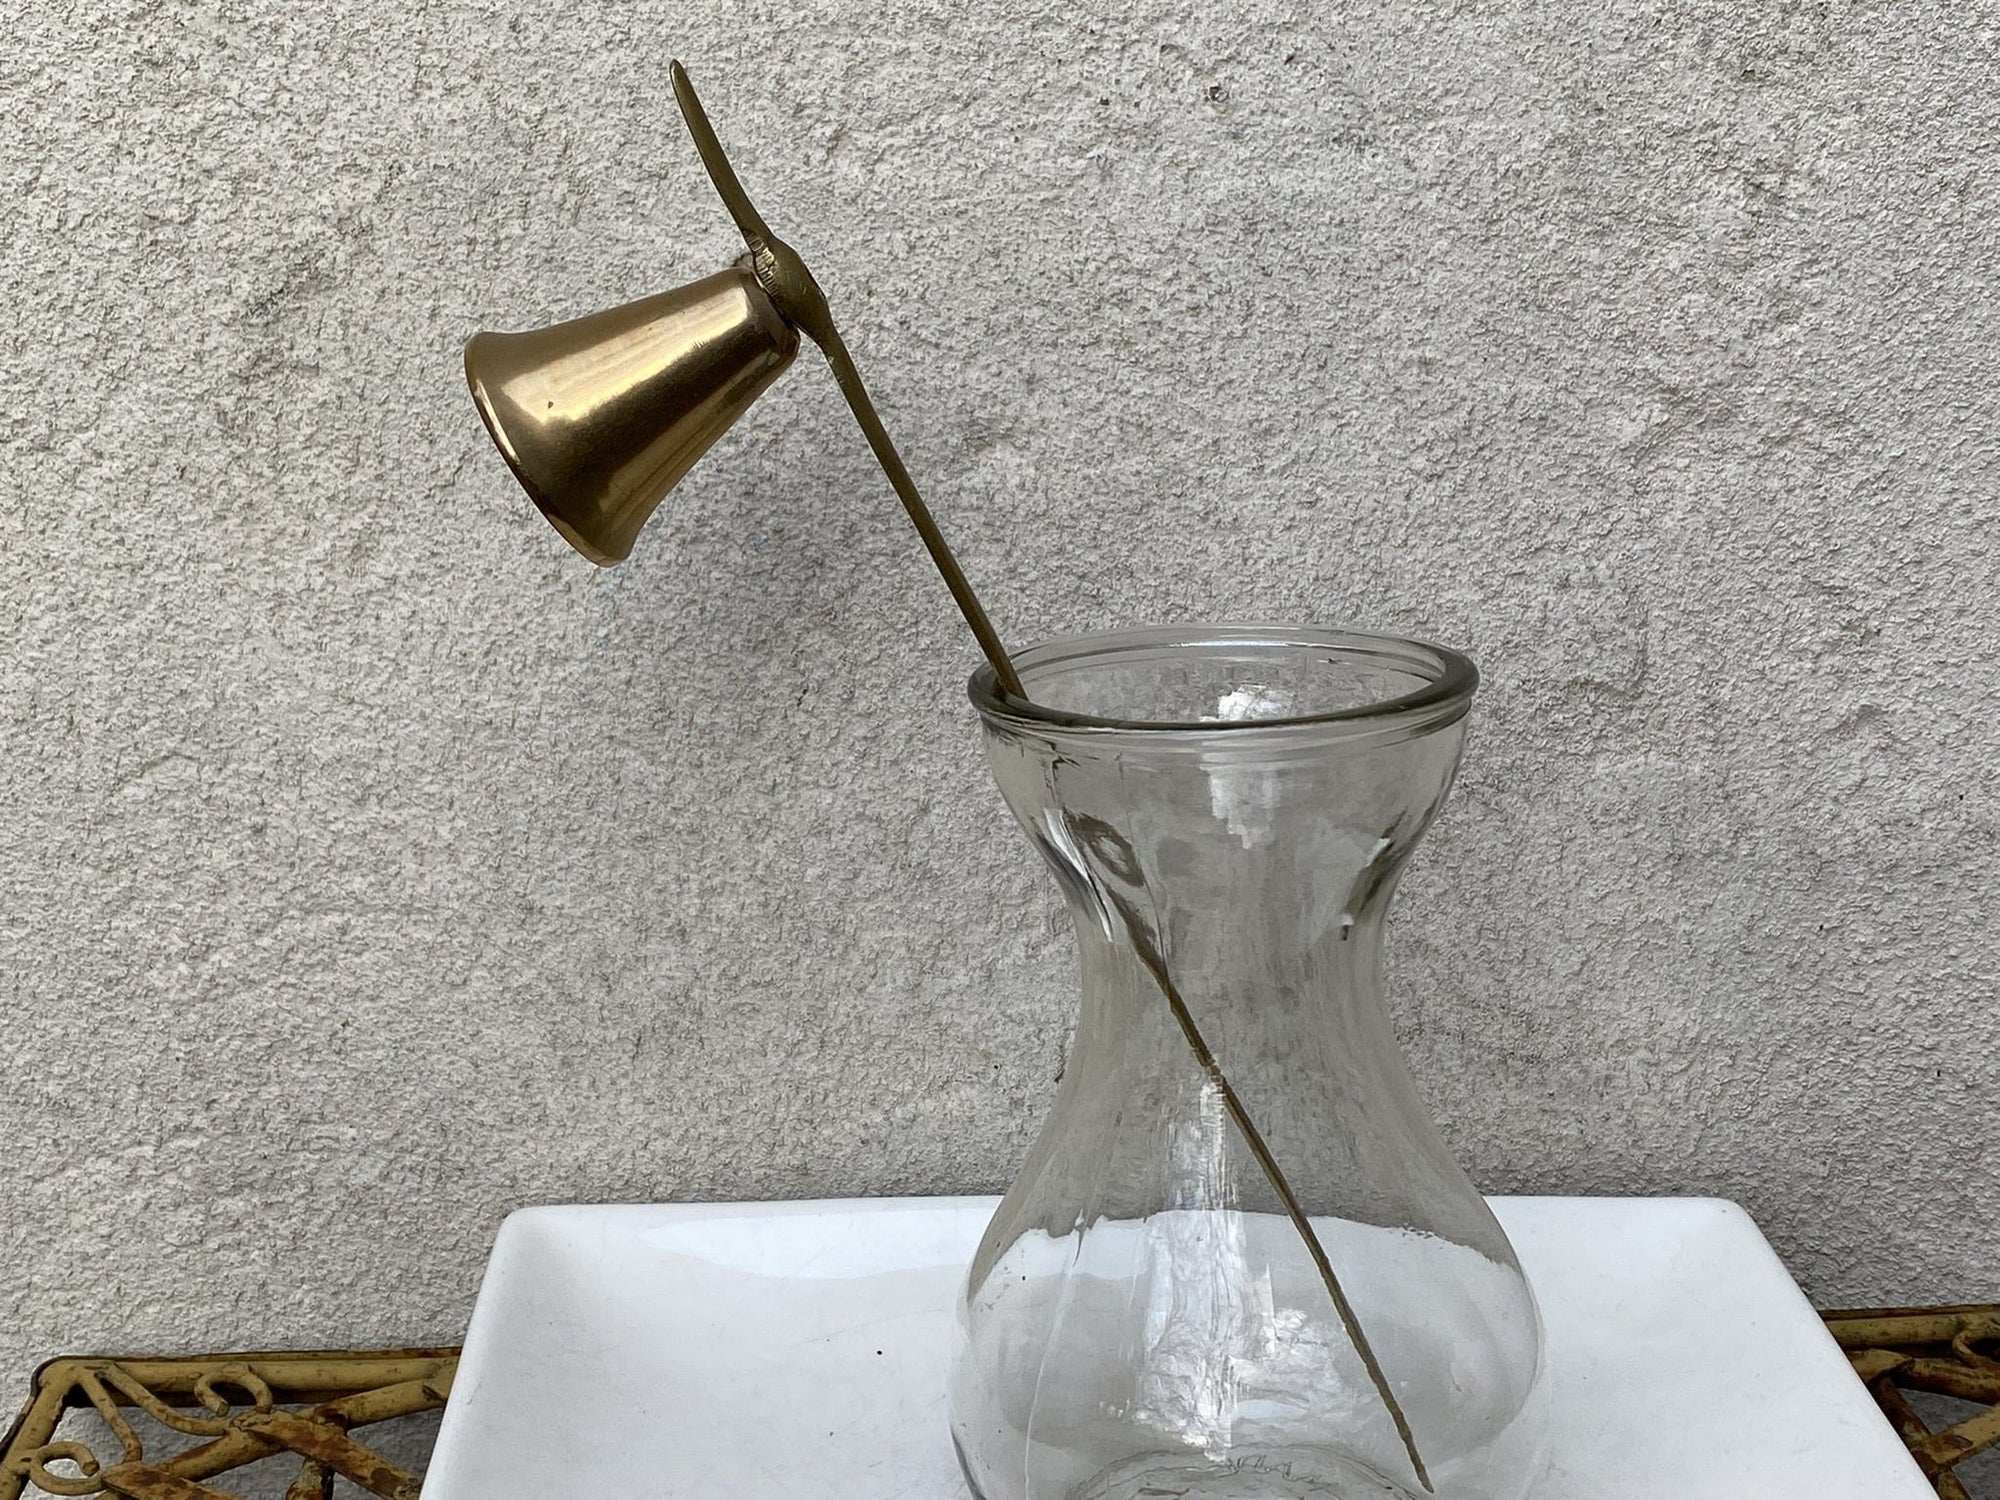 I Like Mike's Mid Century Modern Candle Snuffers Brass Candle Snuffer with Flat Handle, 9" Reach